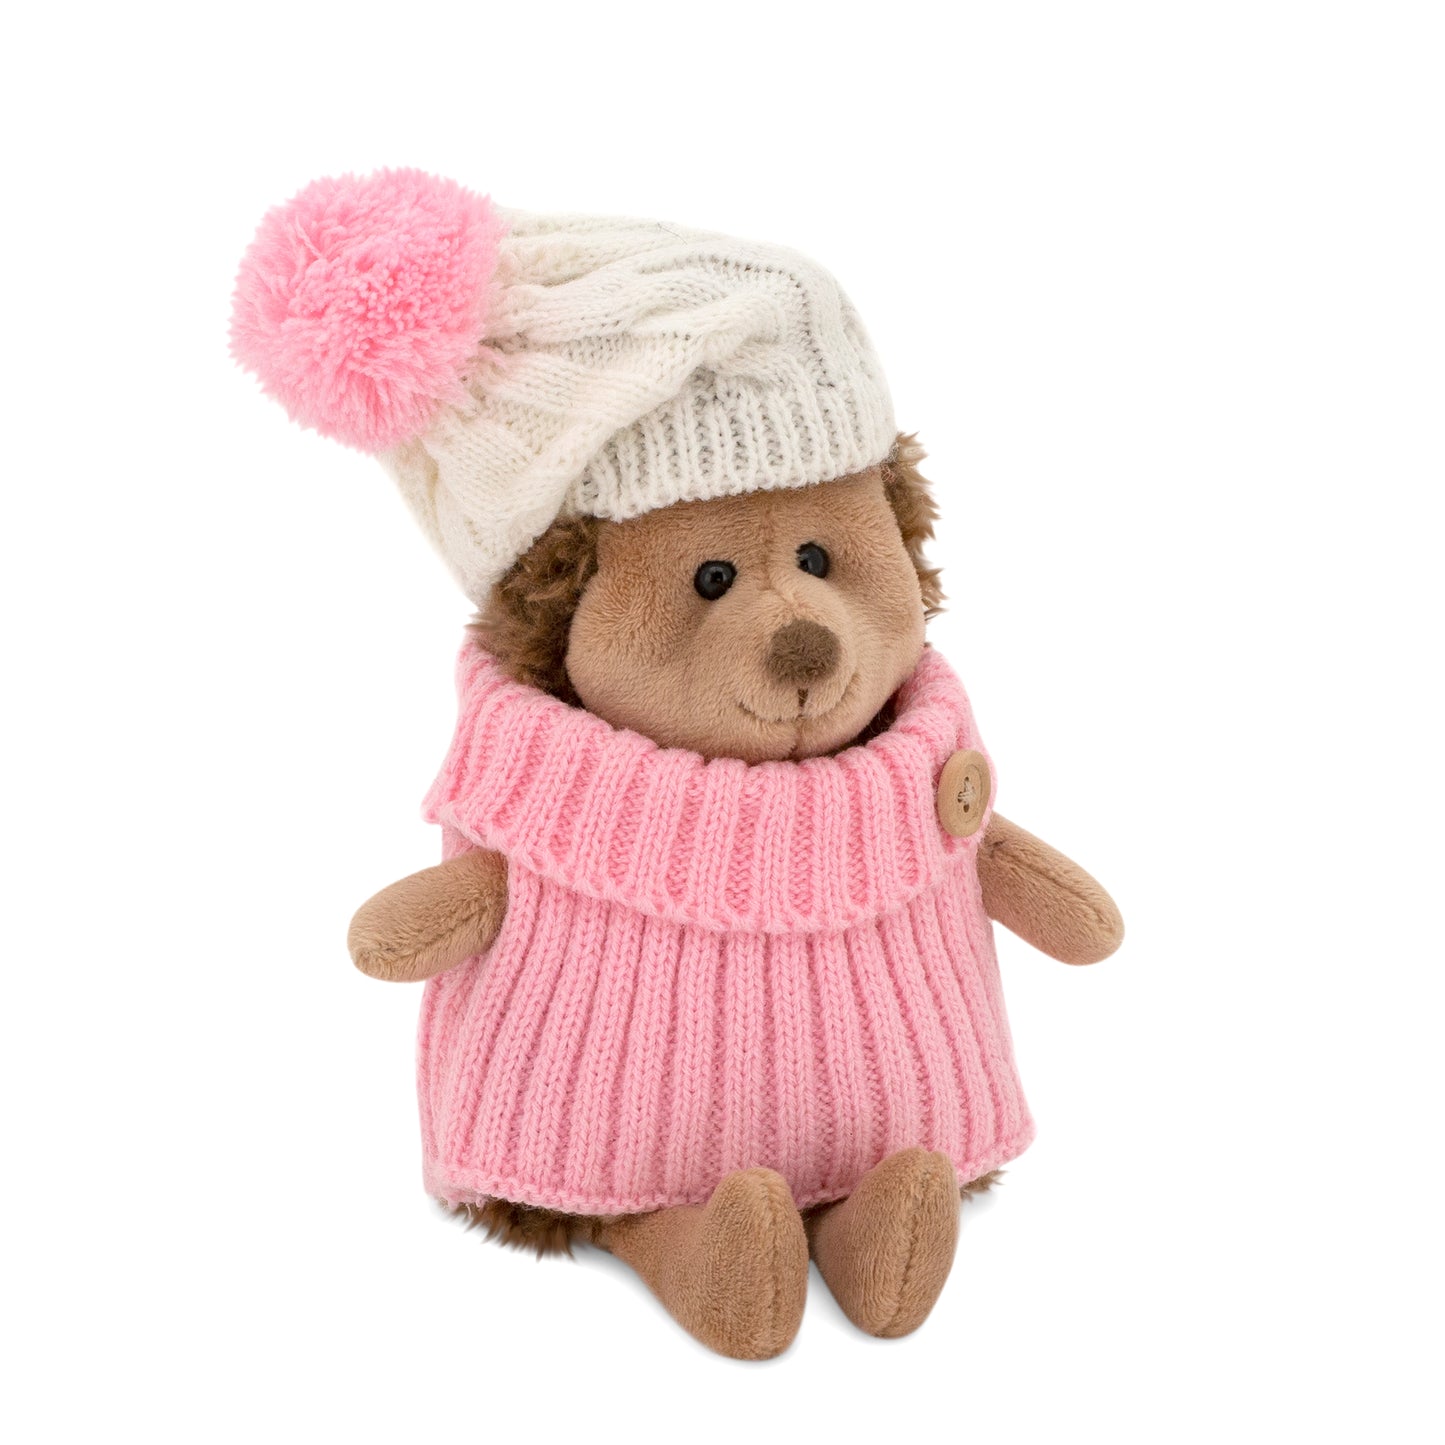 Fluffy the Hedgehog in white/pink hat